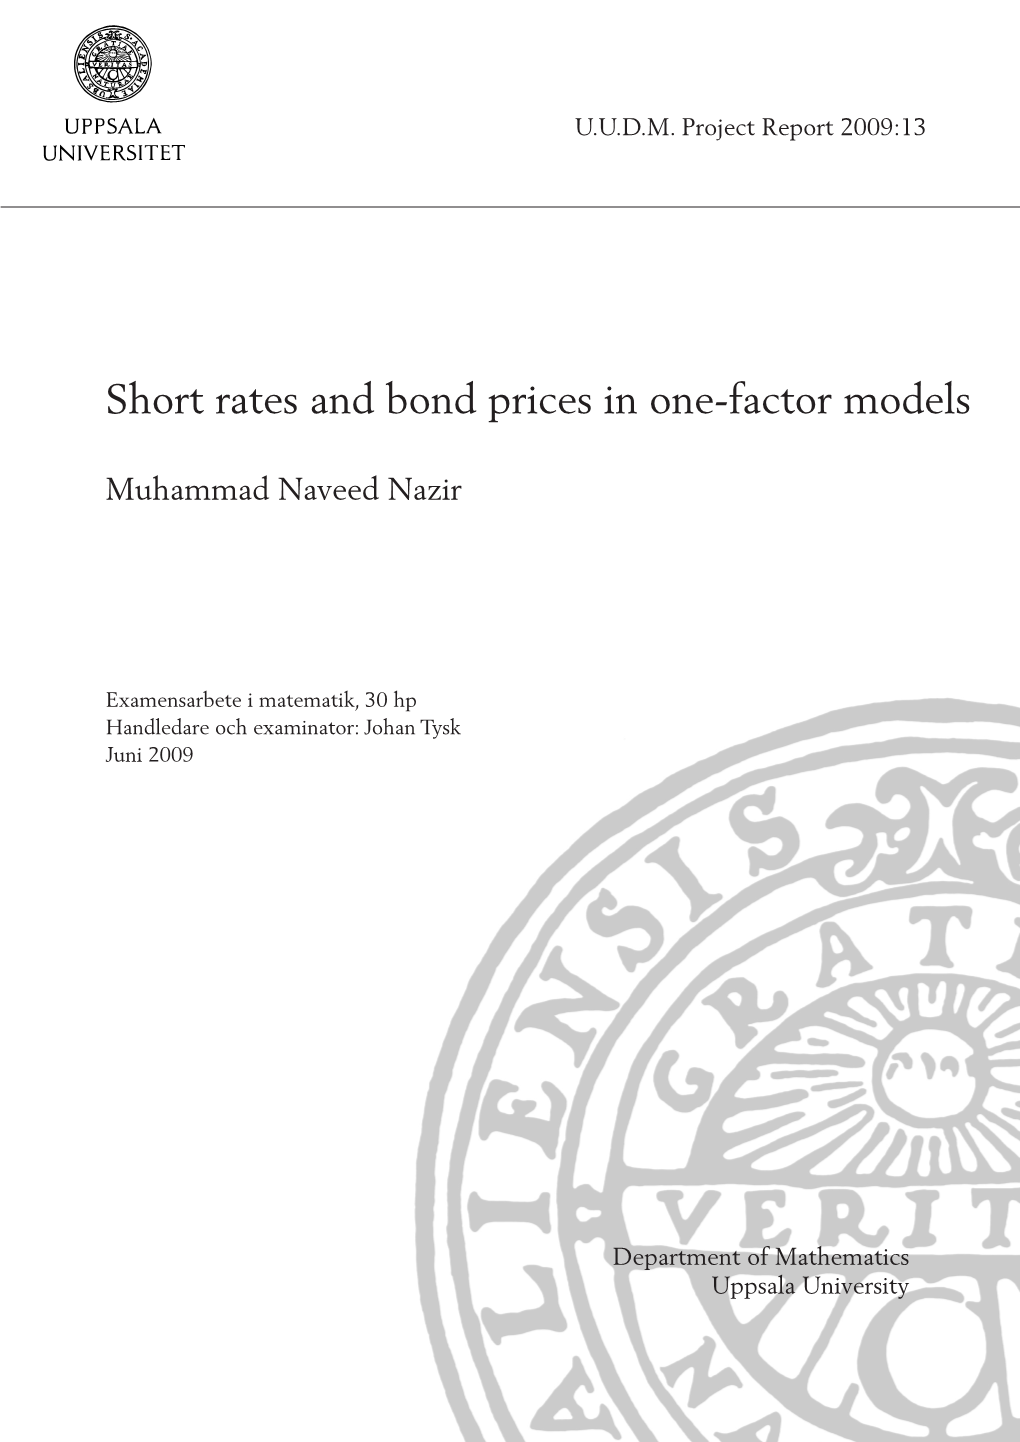 Short Rates and Bond Prices in One-Factor Models